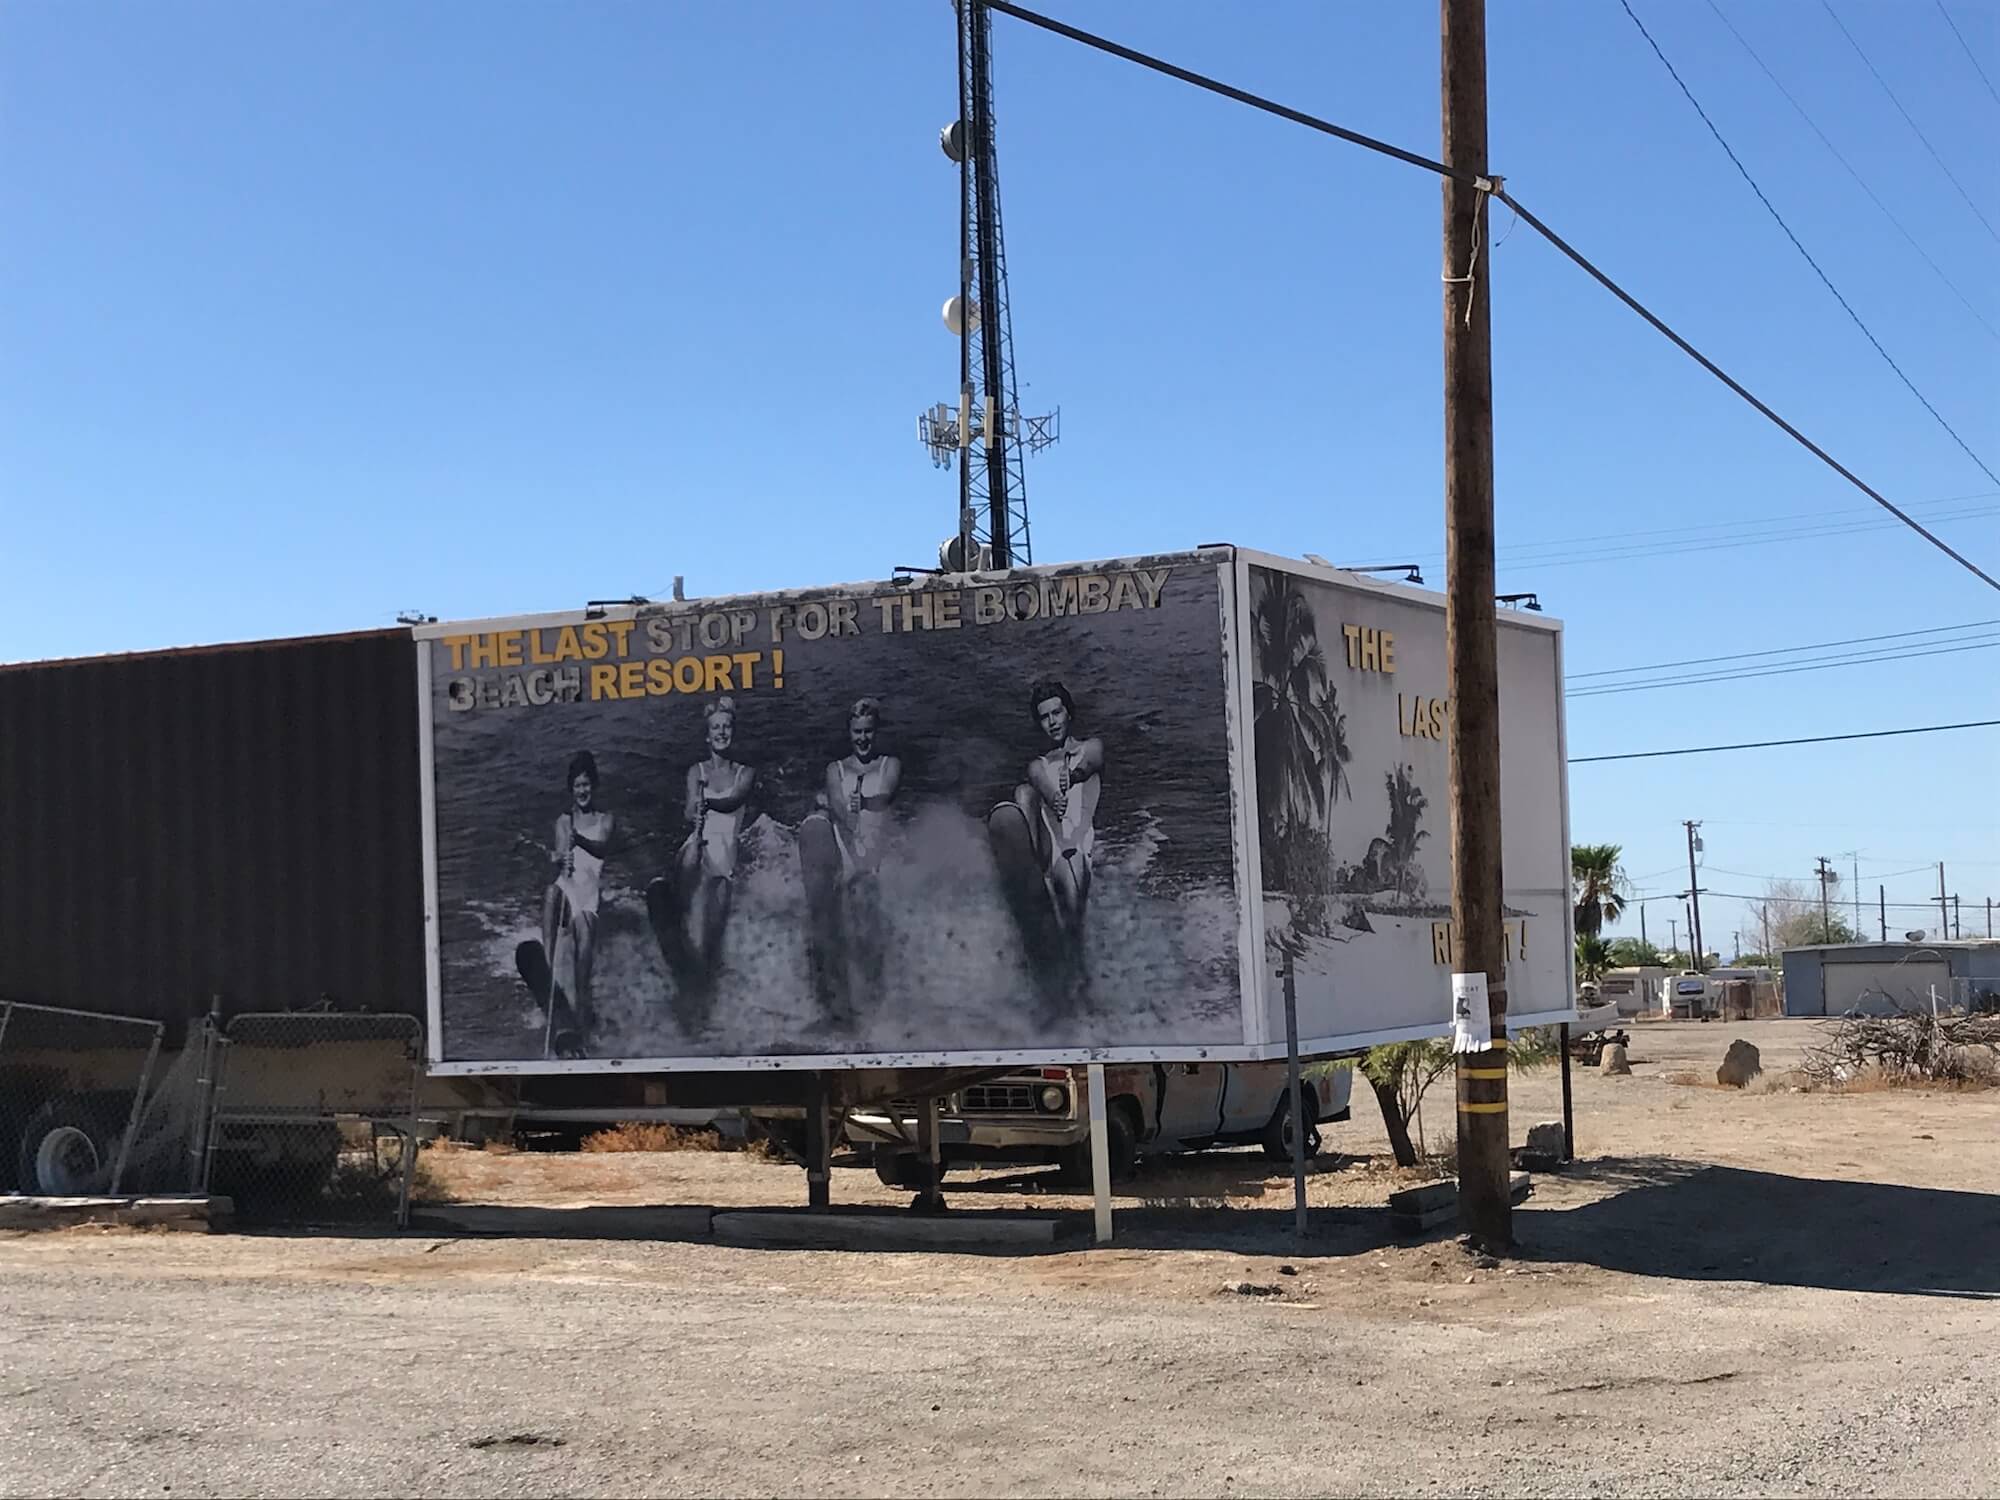 Billboard as you enter town, glory days!